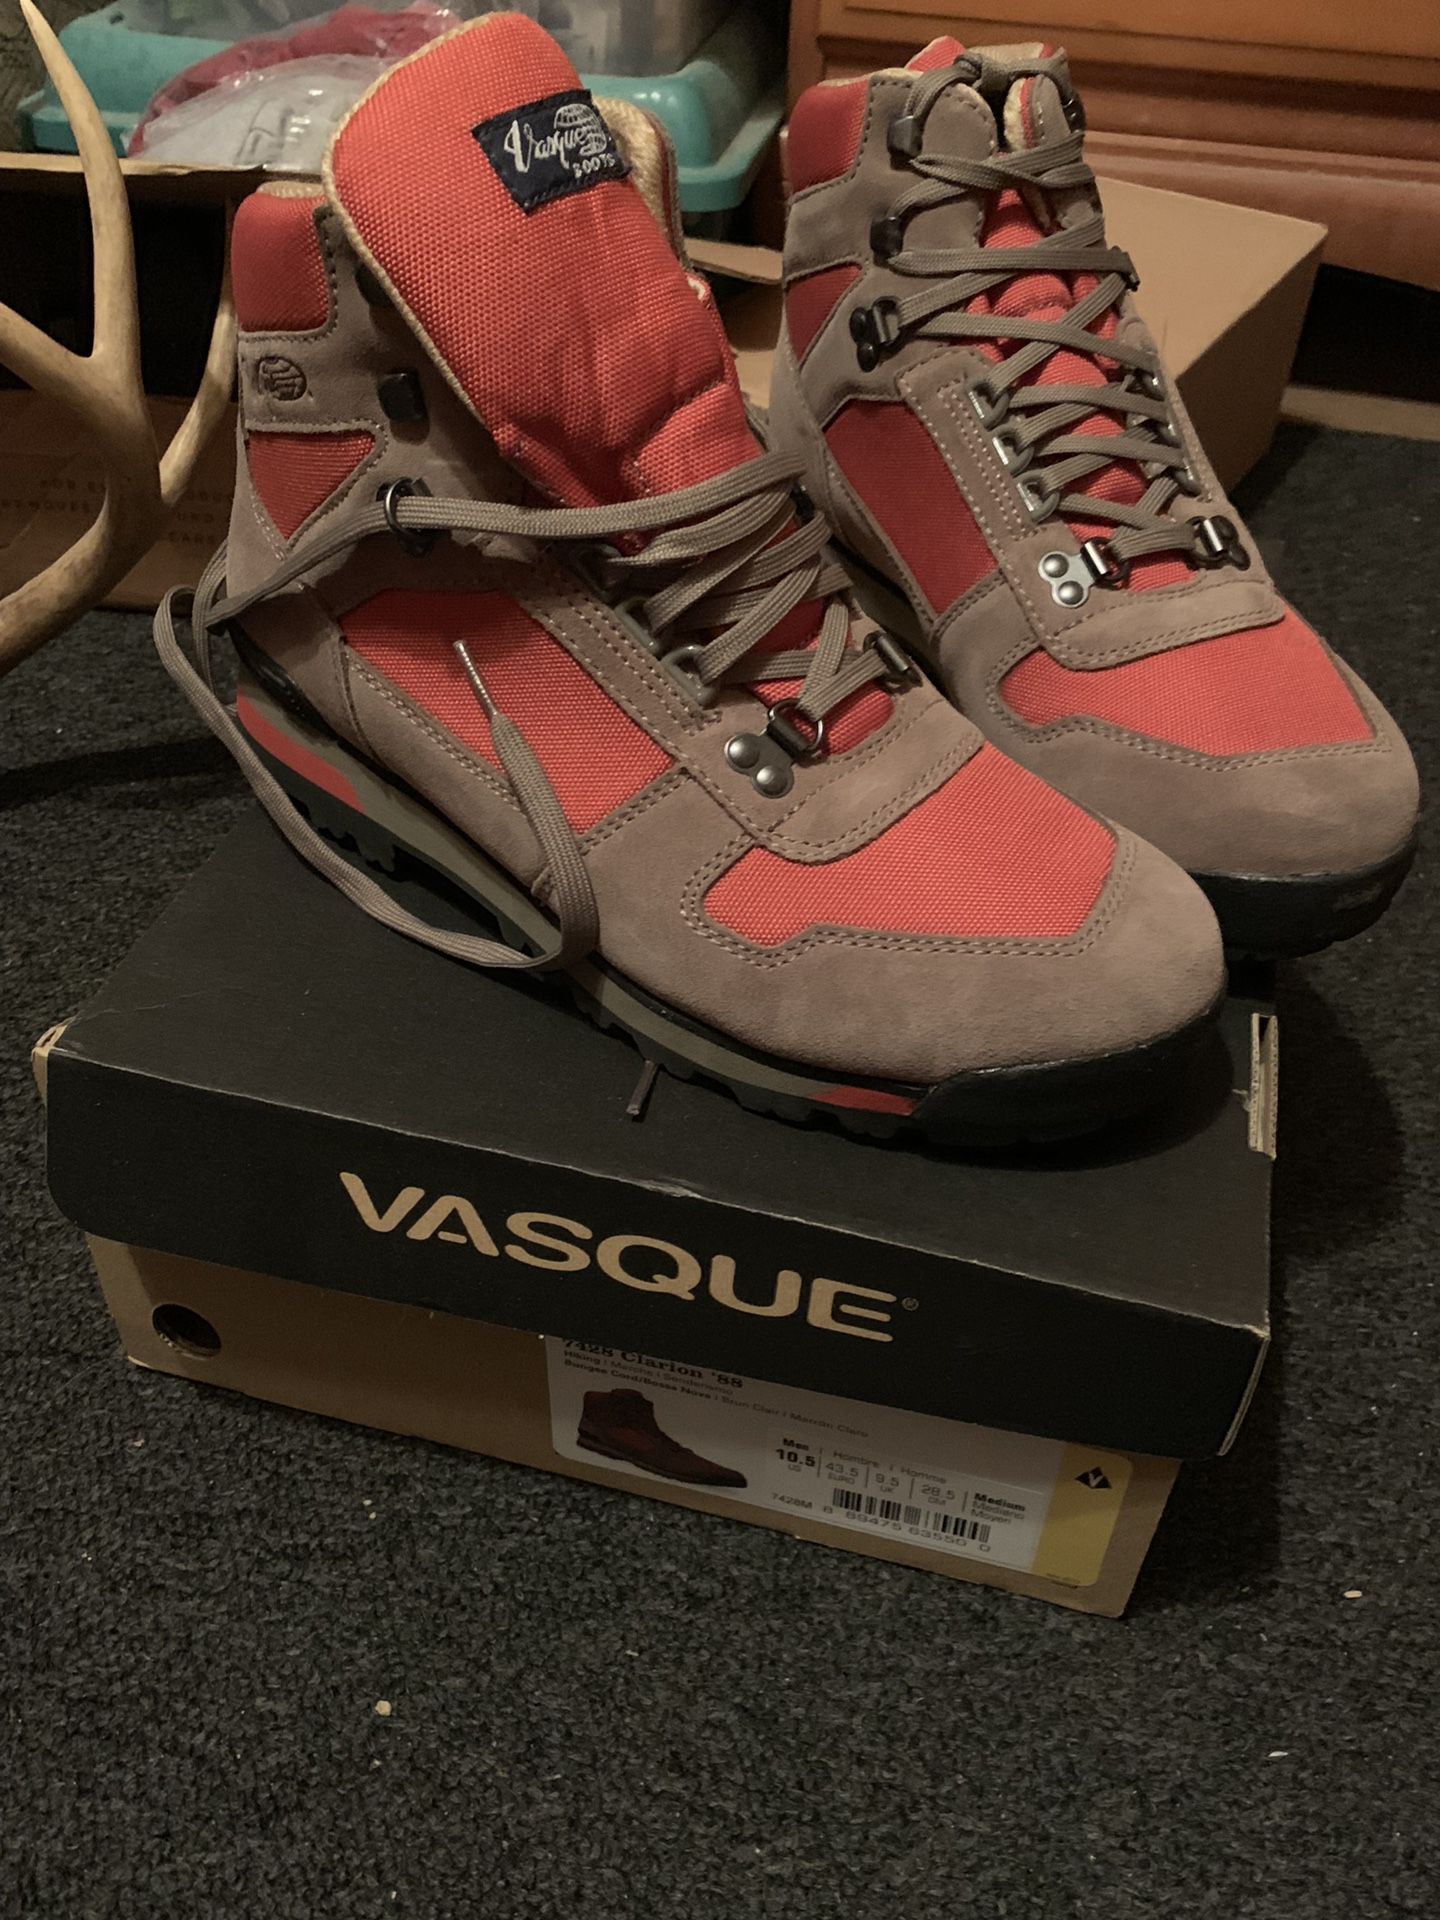 Vasque Clarion 88 hiking boots